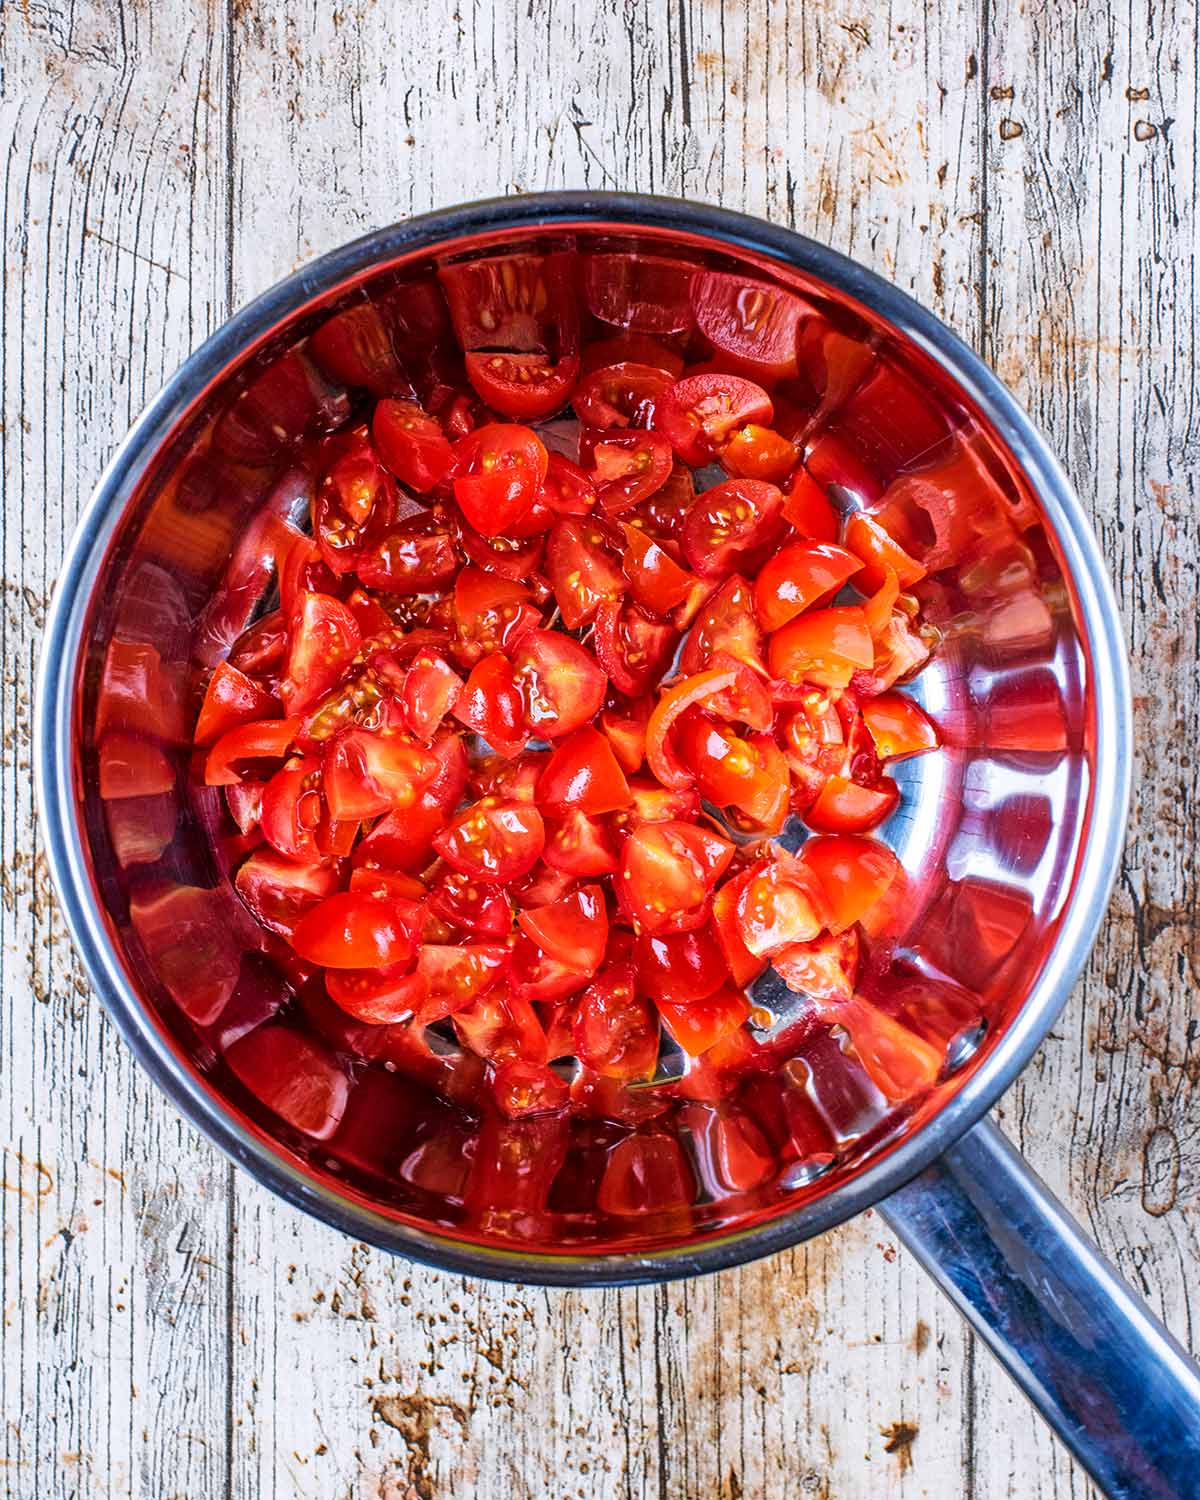 A saucepan containing chopped tomatoes.